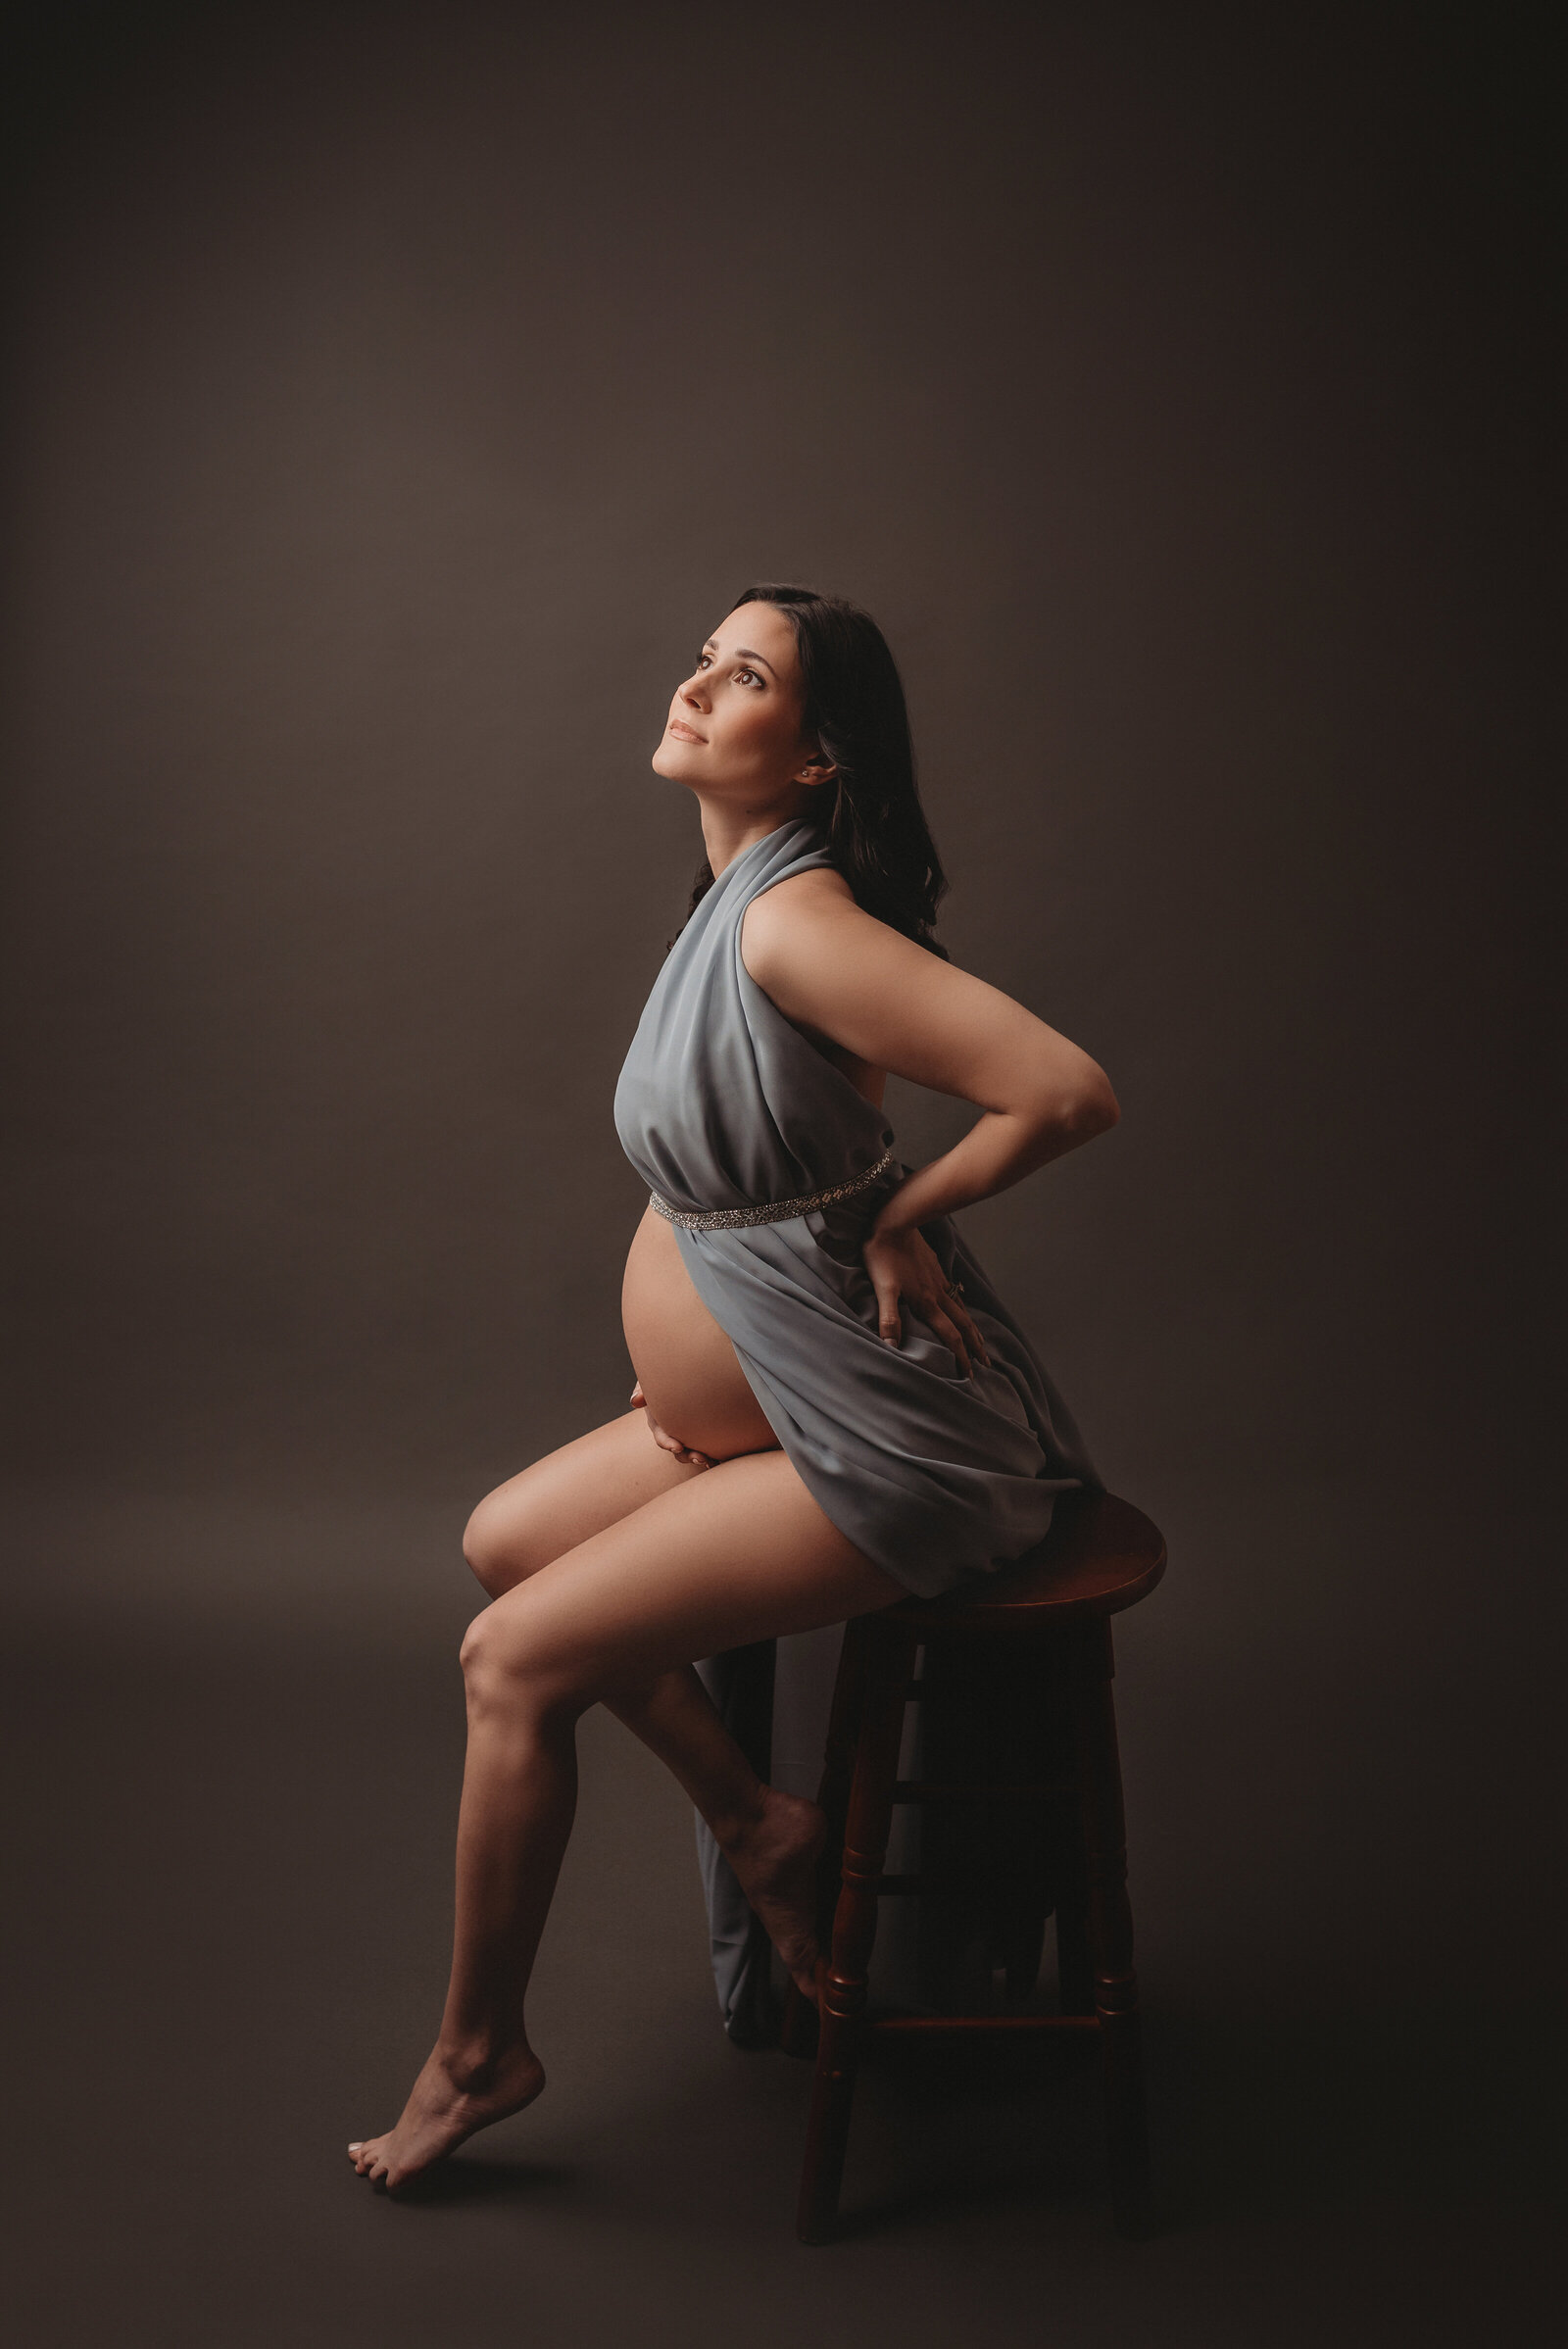 Decatur GA maternity photographer captures 35 week maternity photography pose with mom sitting on stool in blue chiffon fabric showing stomach holding onto it and looking up at ceiling